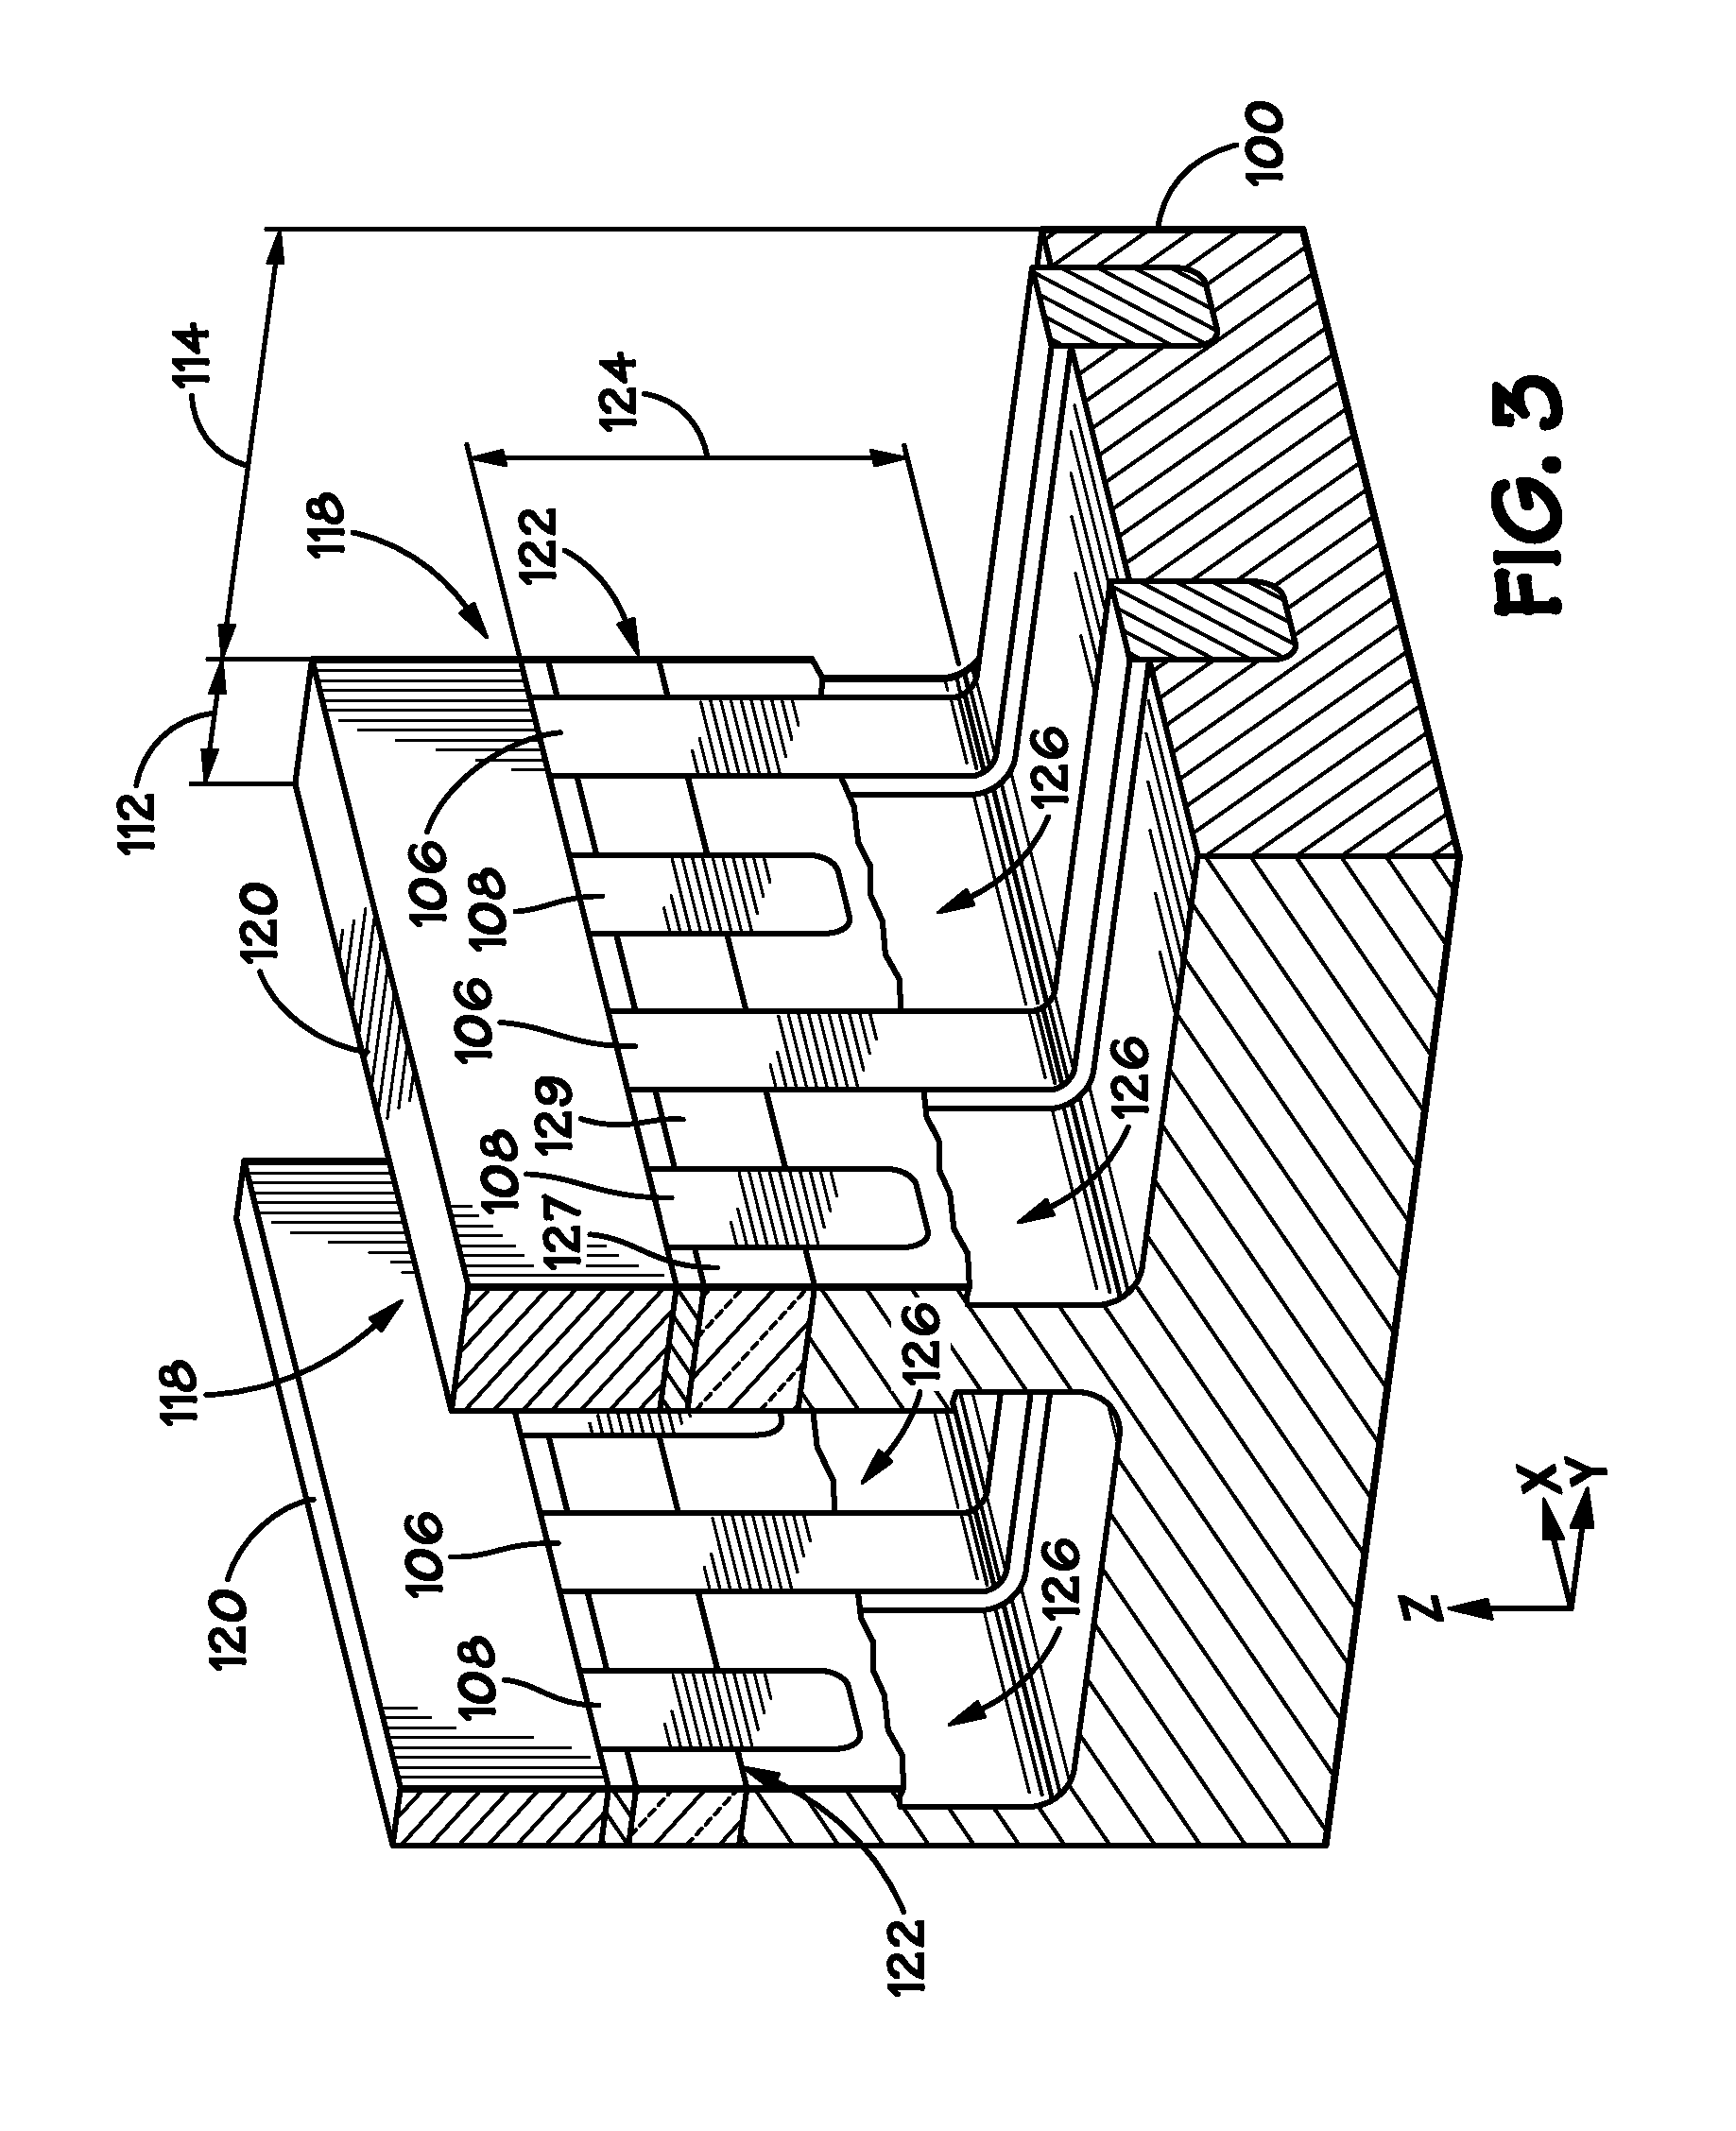 Cross-hair cell based floating body device